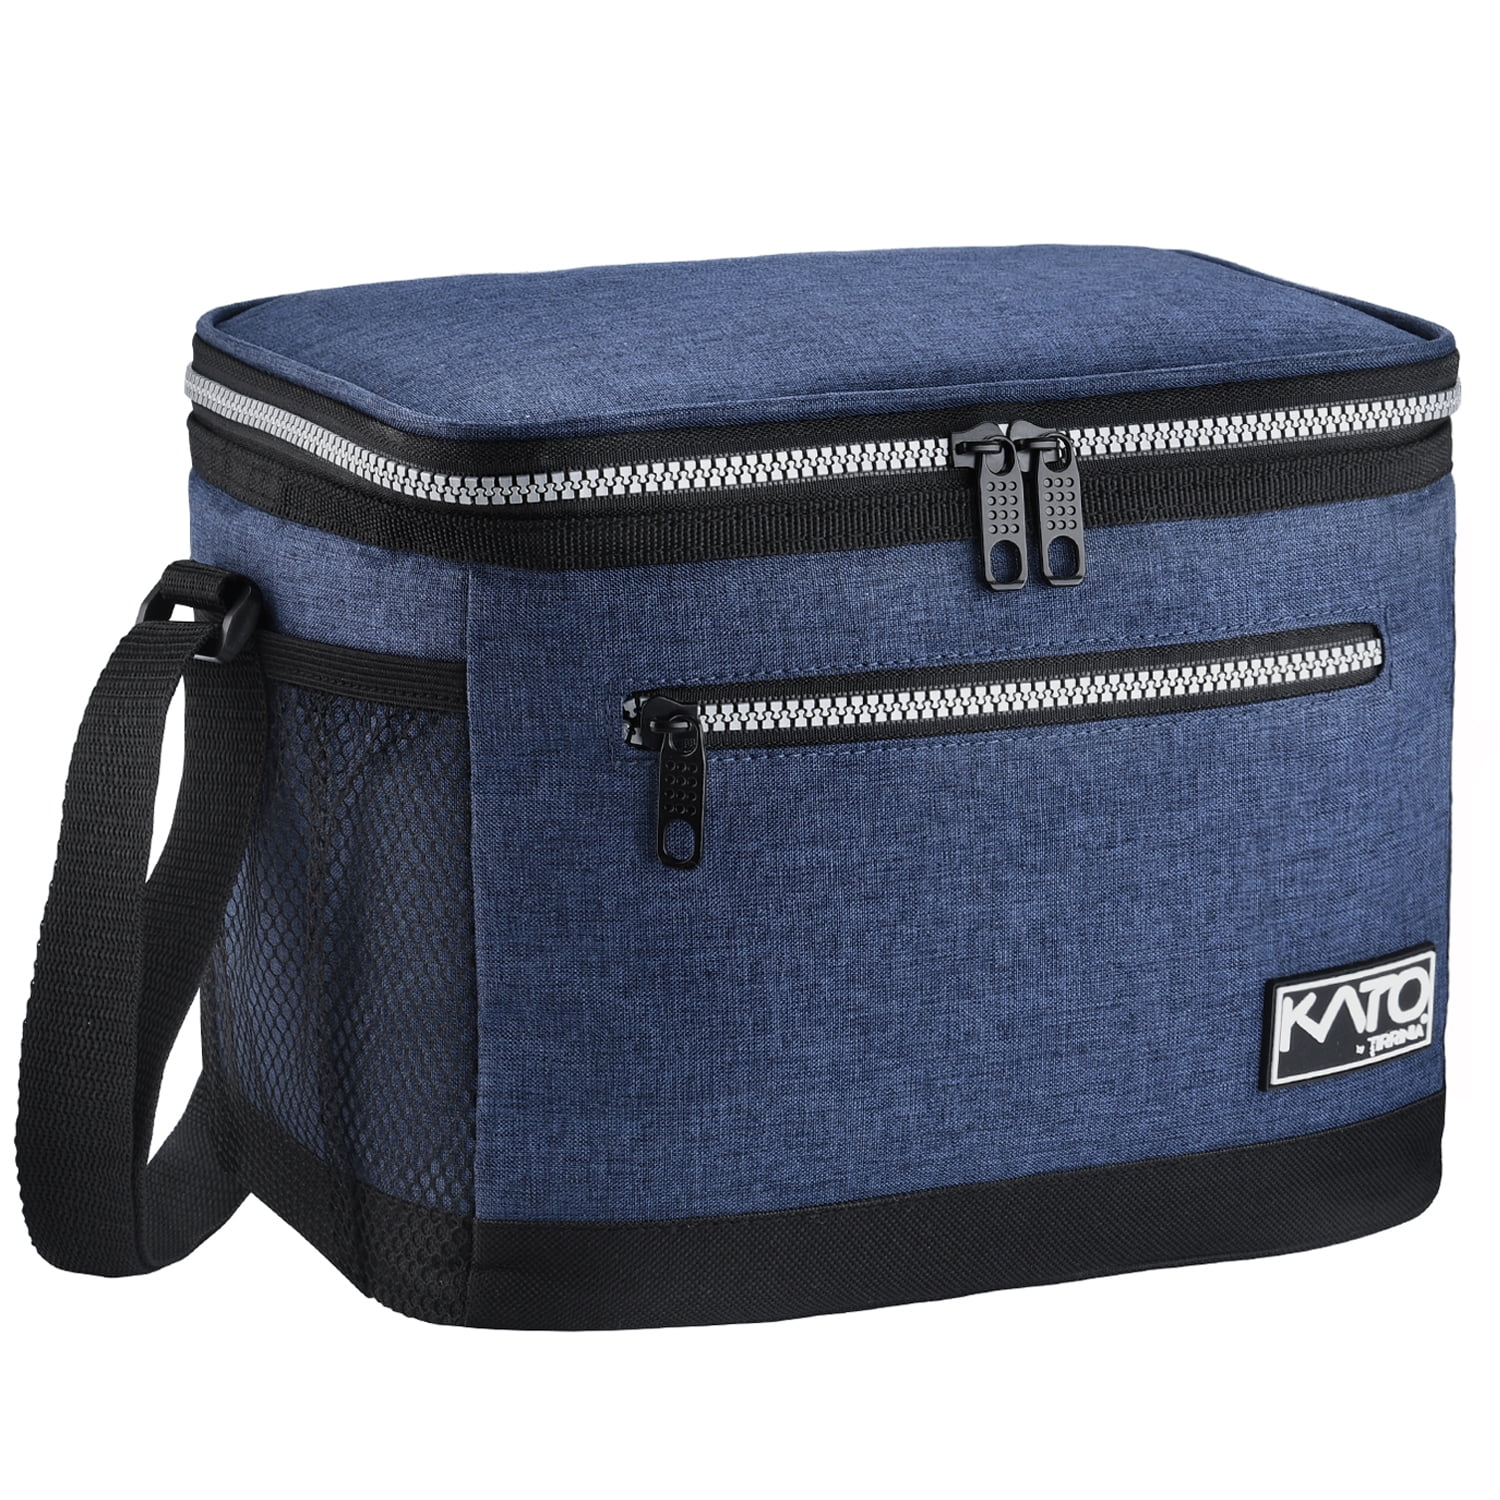 Insulated Lunch Bag for Women Men Thermal Cooler Tote Food Picnic Storage Box 